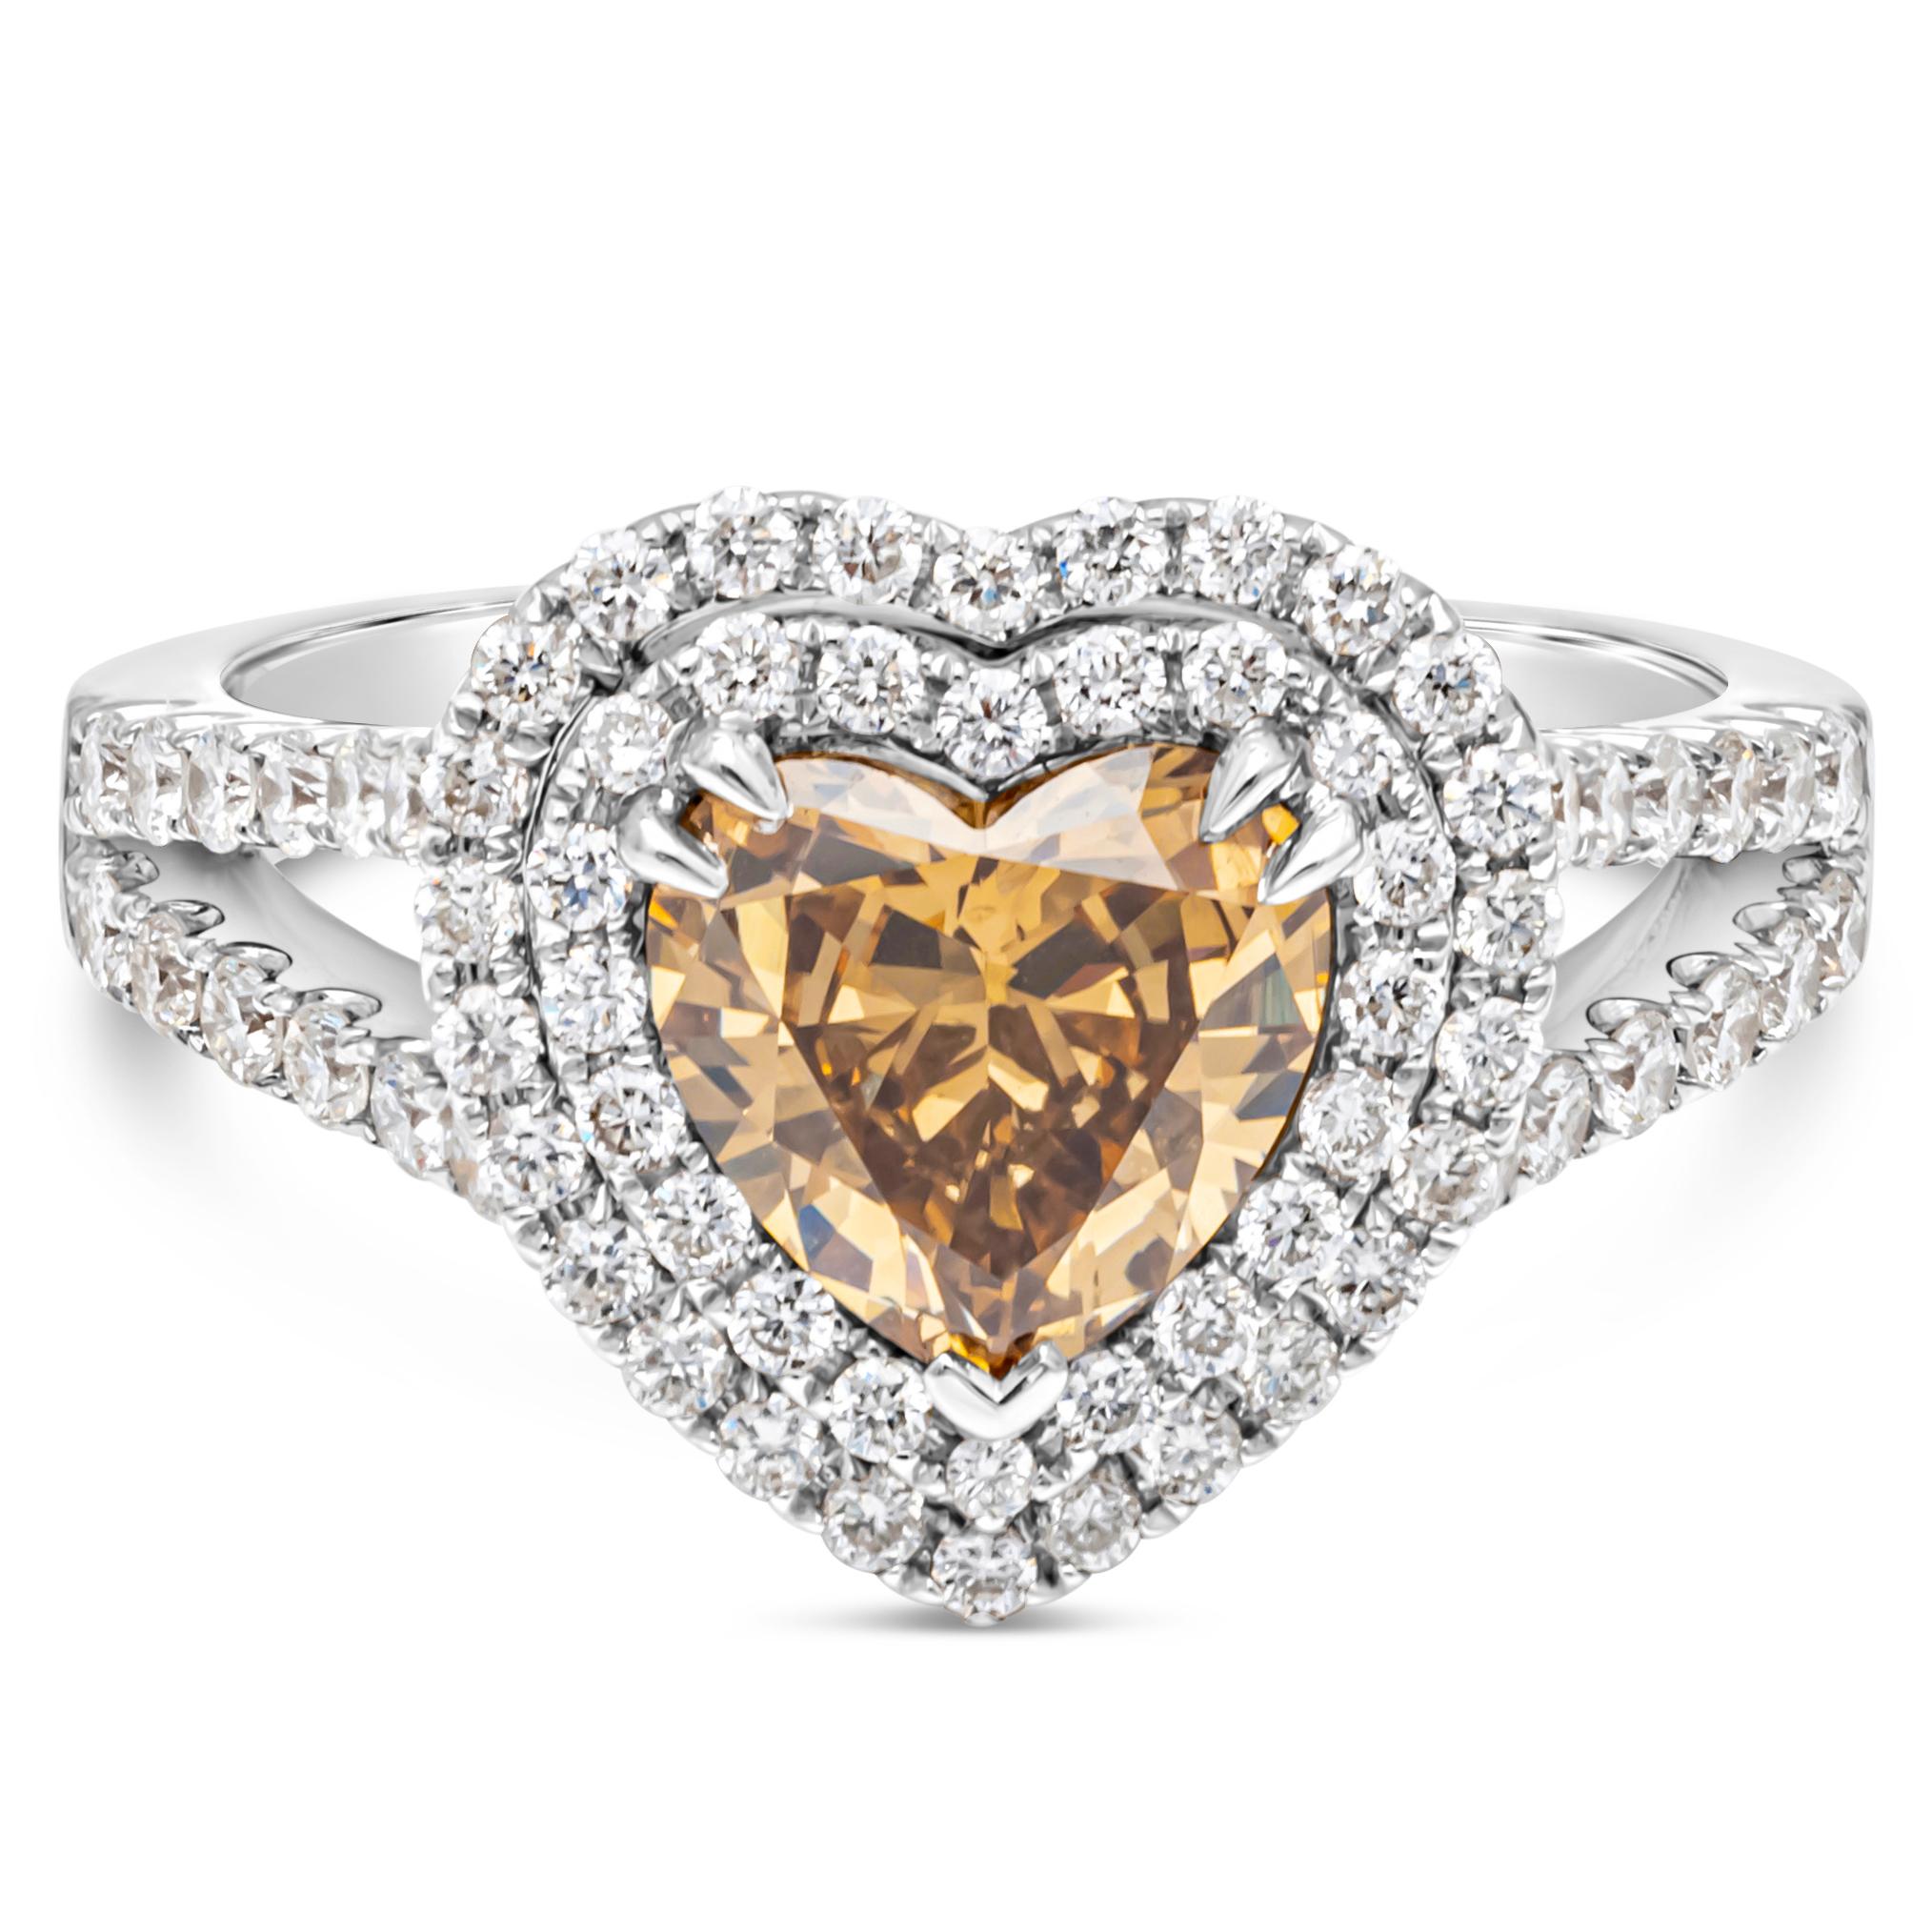 Contemporary GIA Certified 1.45 Carat Heart Shape Fancy Dark Brown Yellow Diamond Ring For Sale